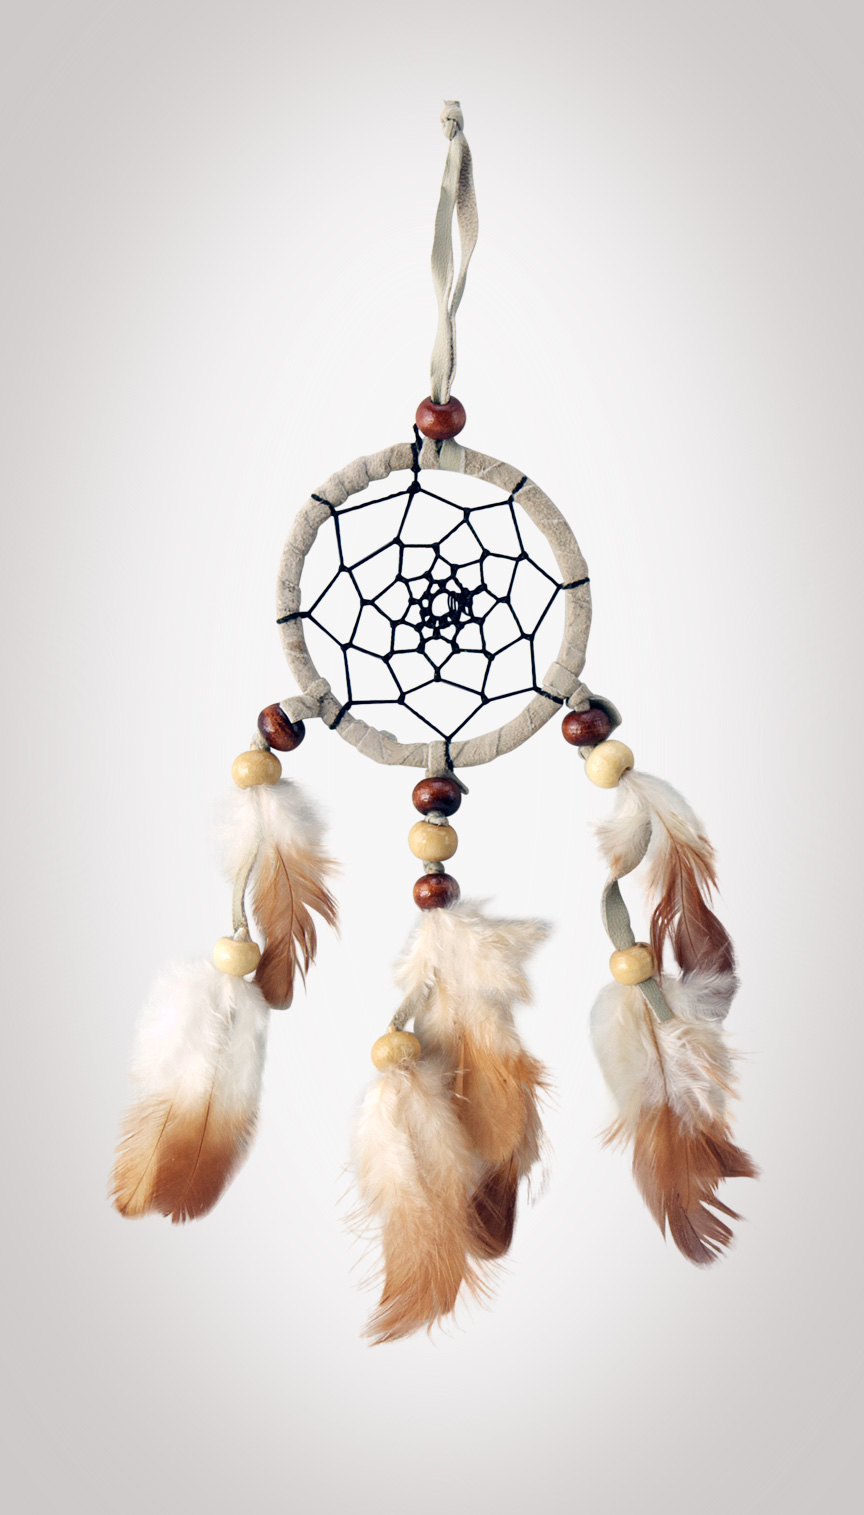 Shows an image of our dreamcatcher owg006